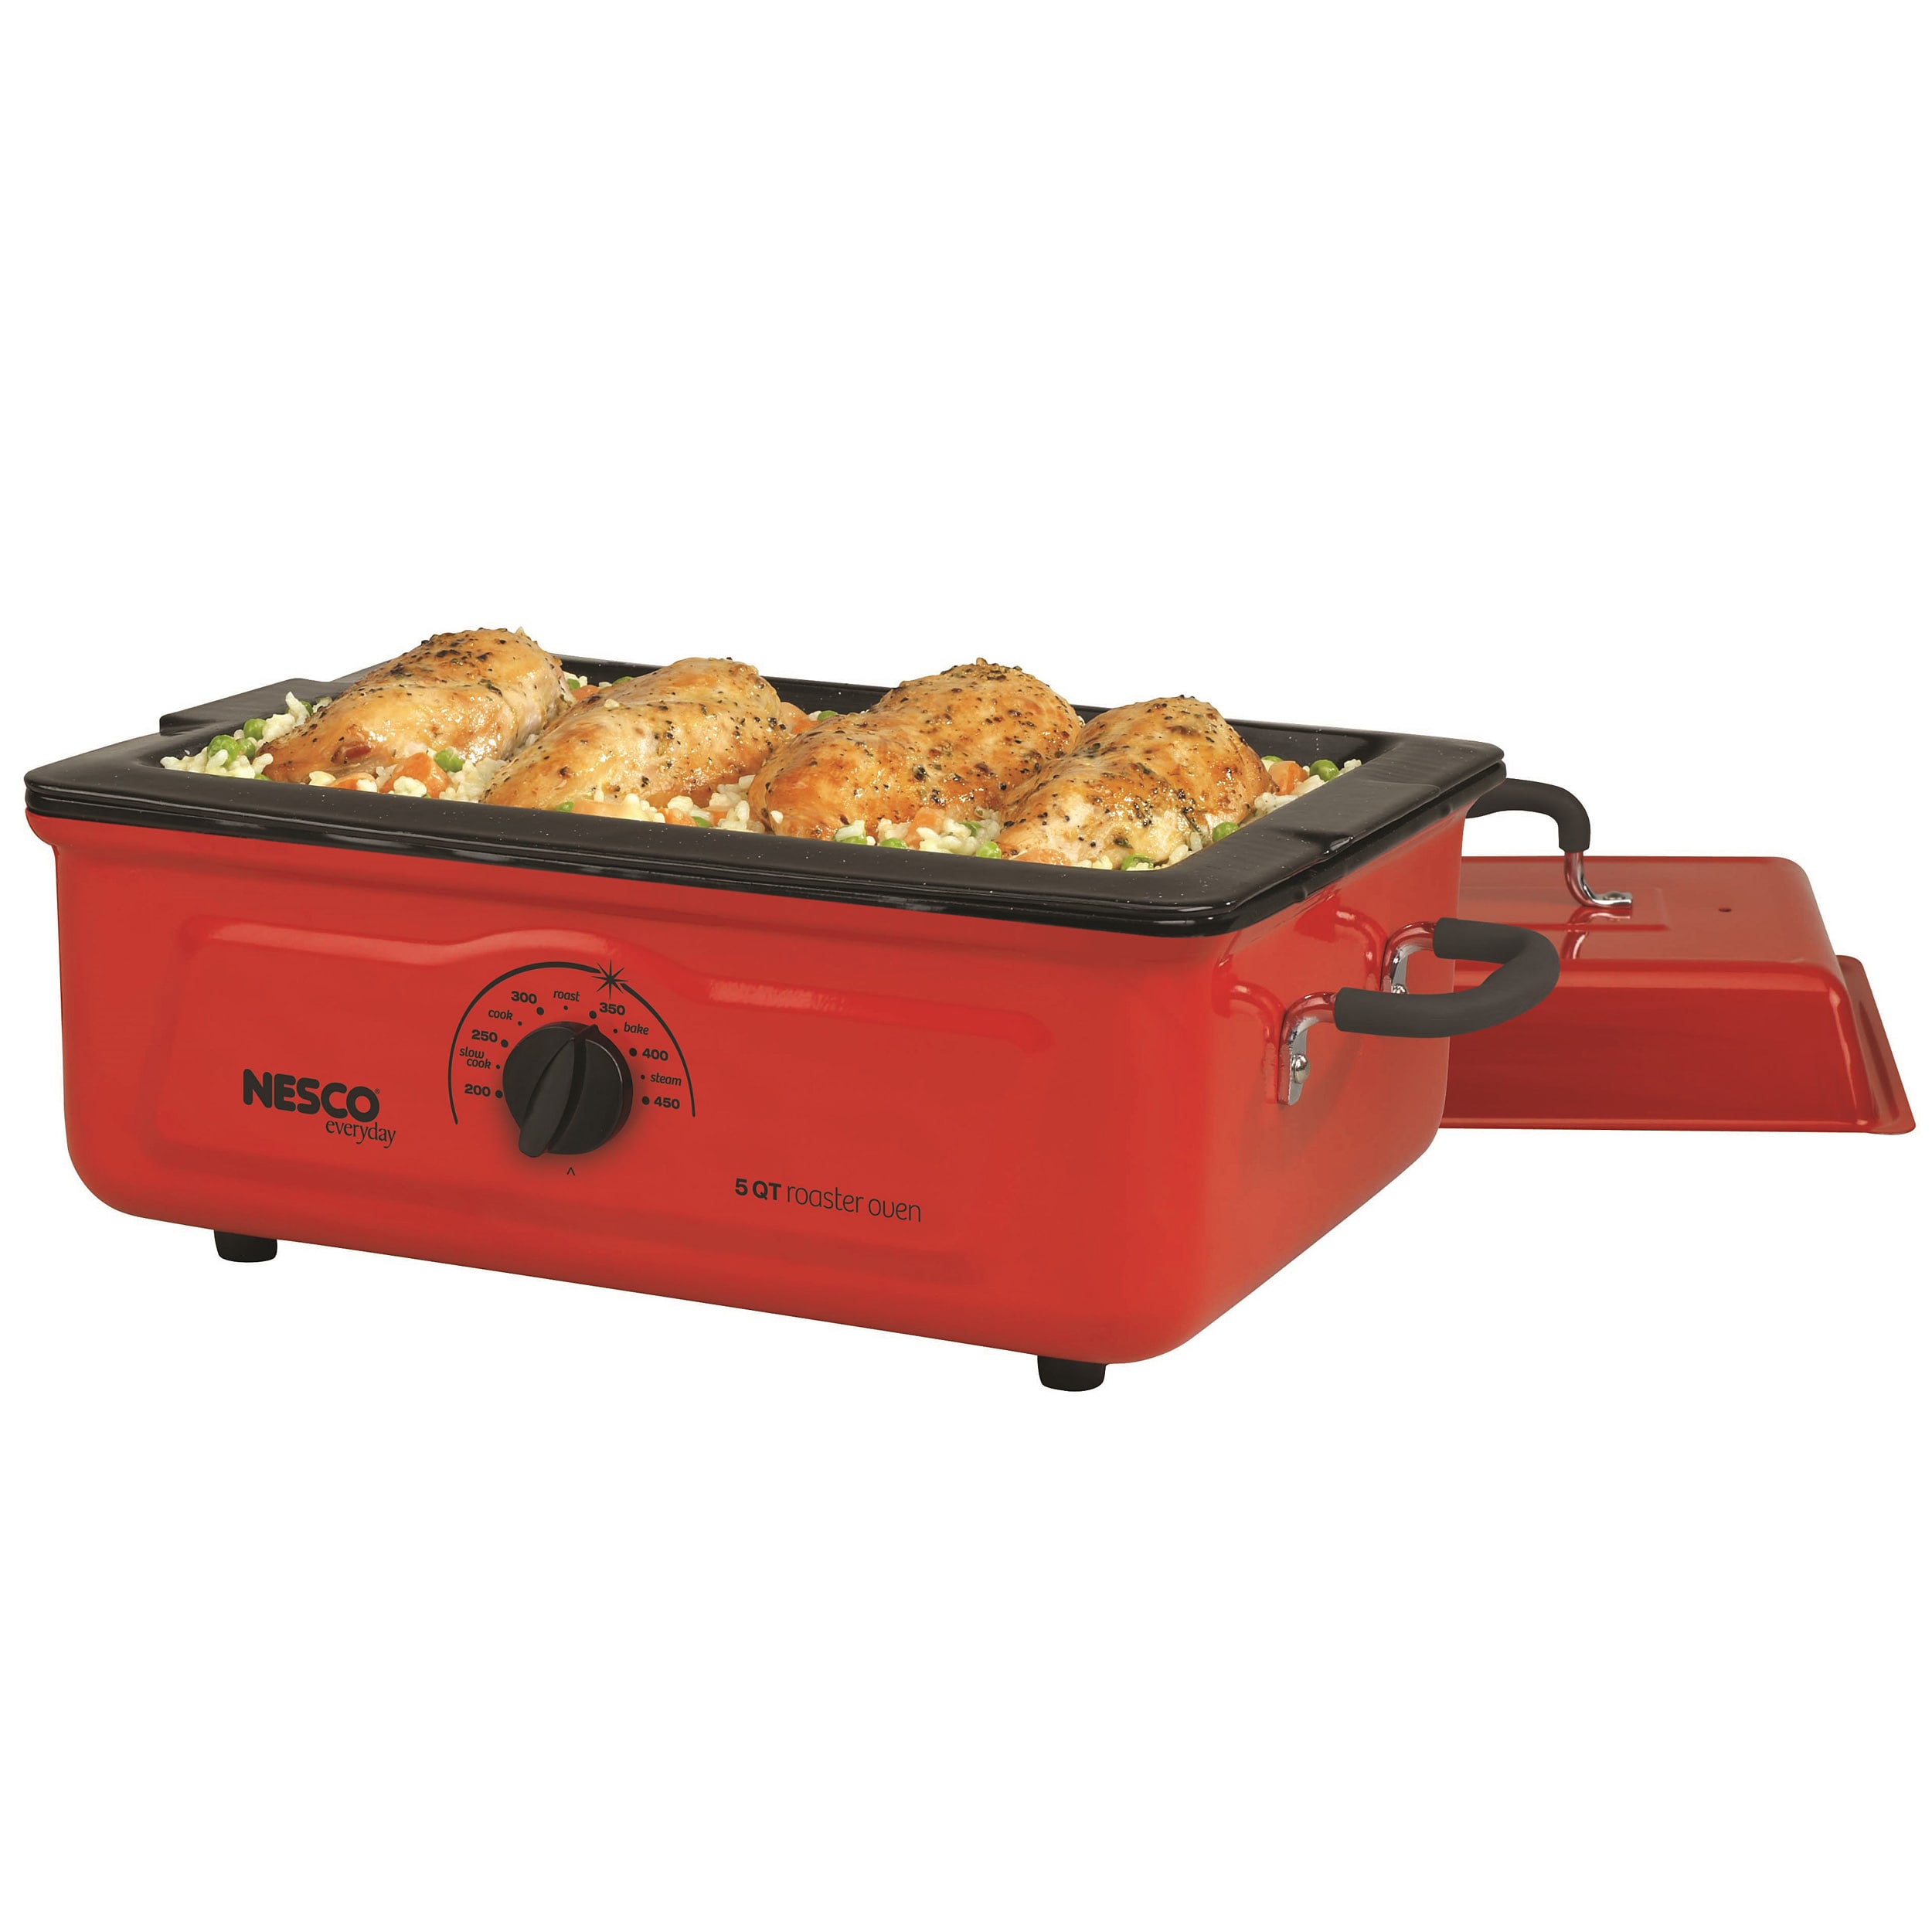 https://ak1.ostkcdn.com/images/products/8217092/Nesco-Cookwell-Red-5-quart-Porcelain-Roaster-Oven-9e756b13-3a3f-4eb4-8441-631fdc9ca323.jpg